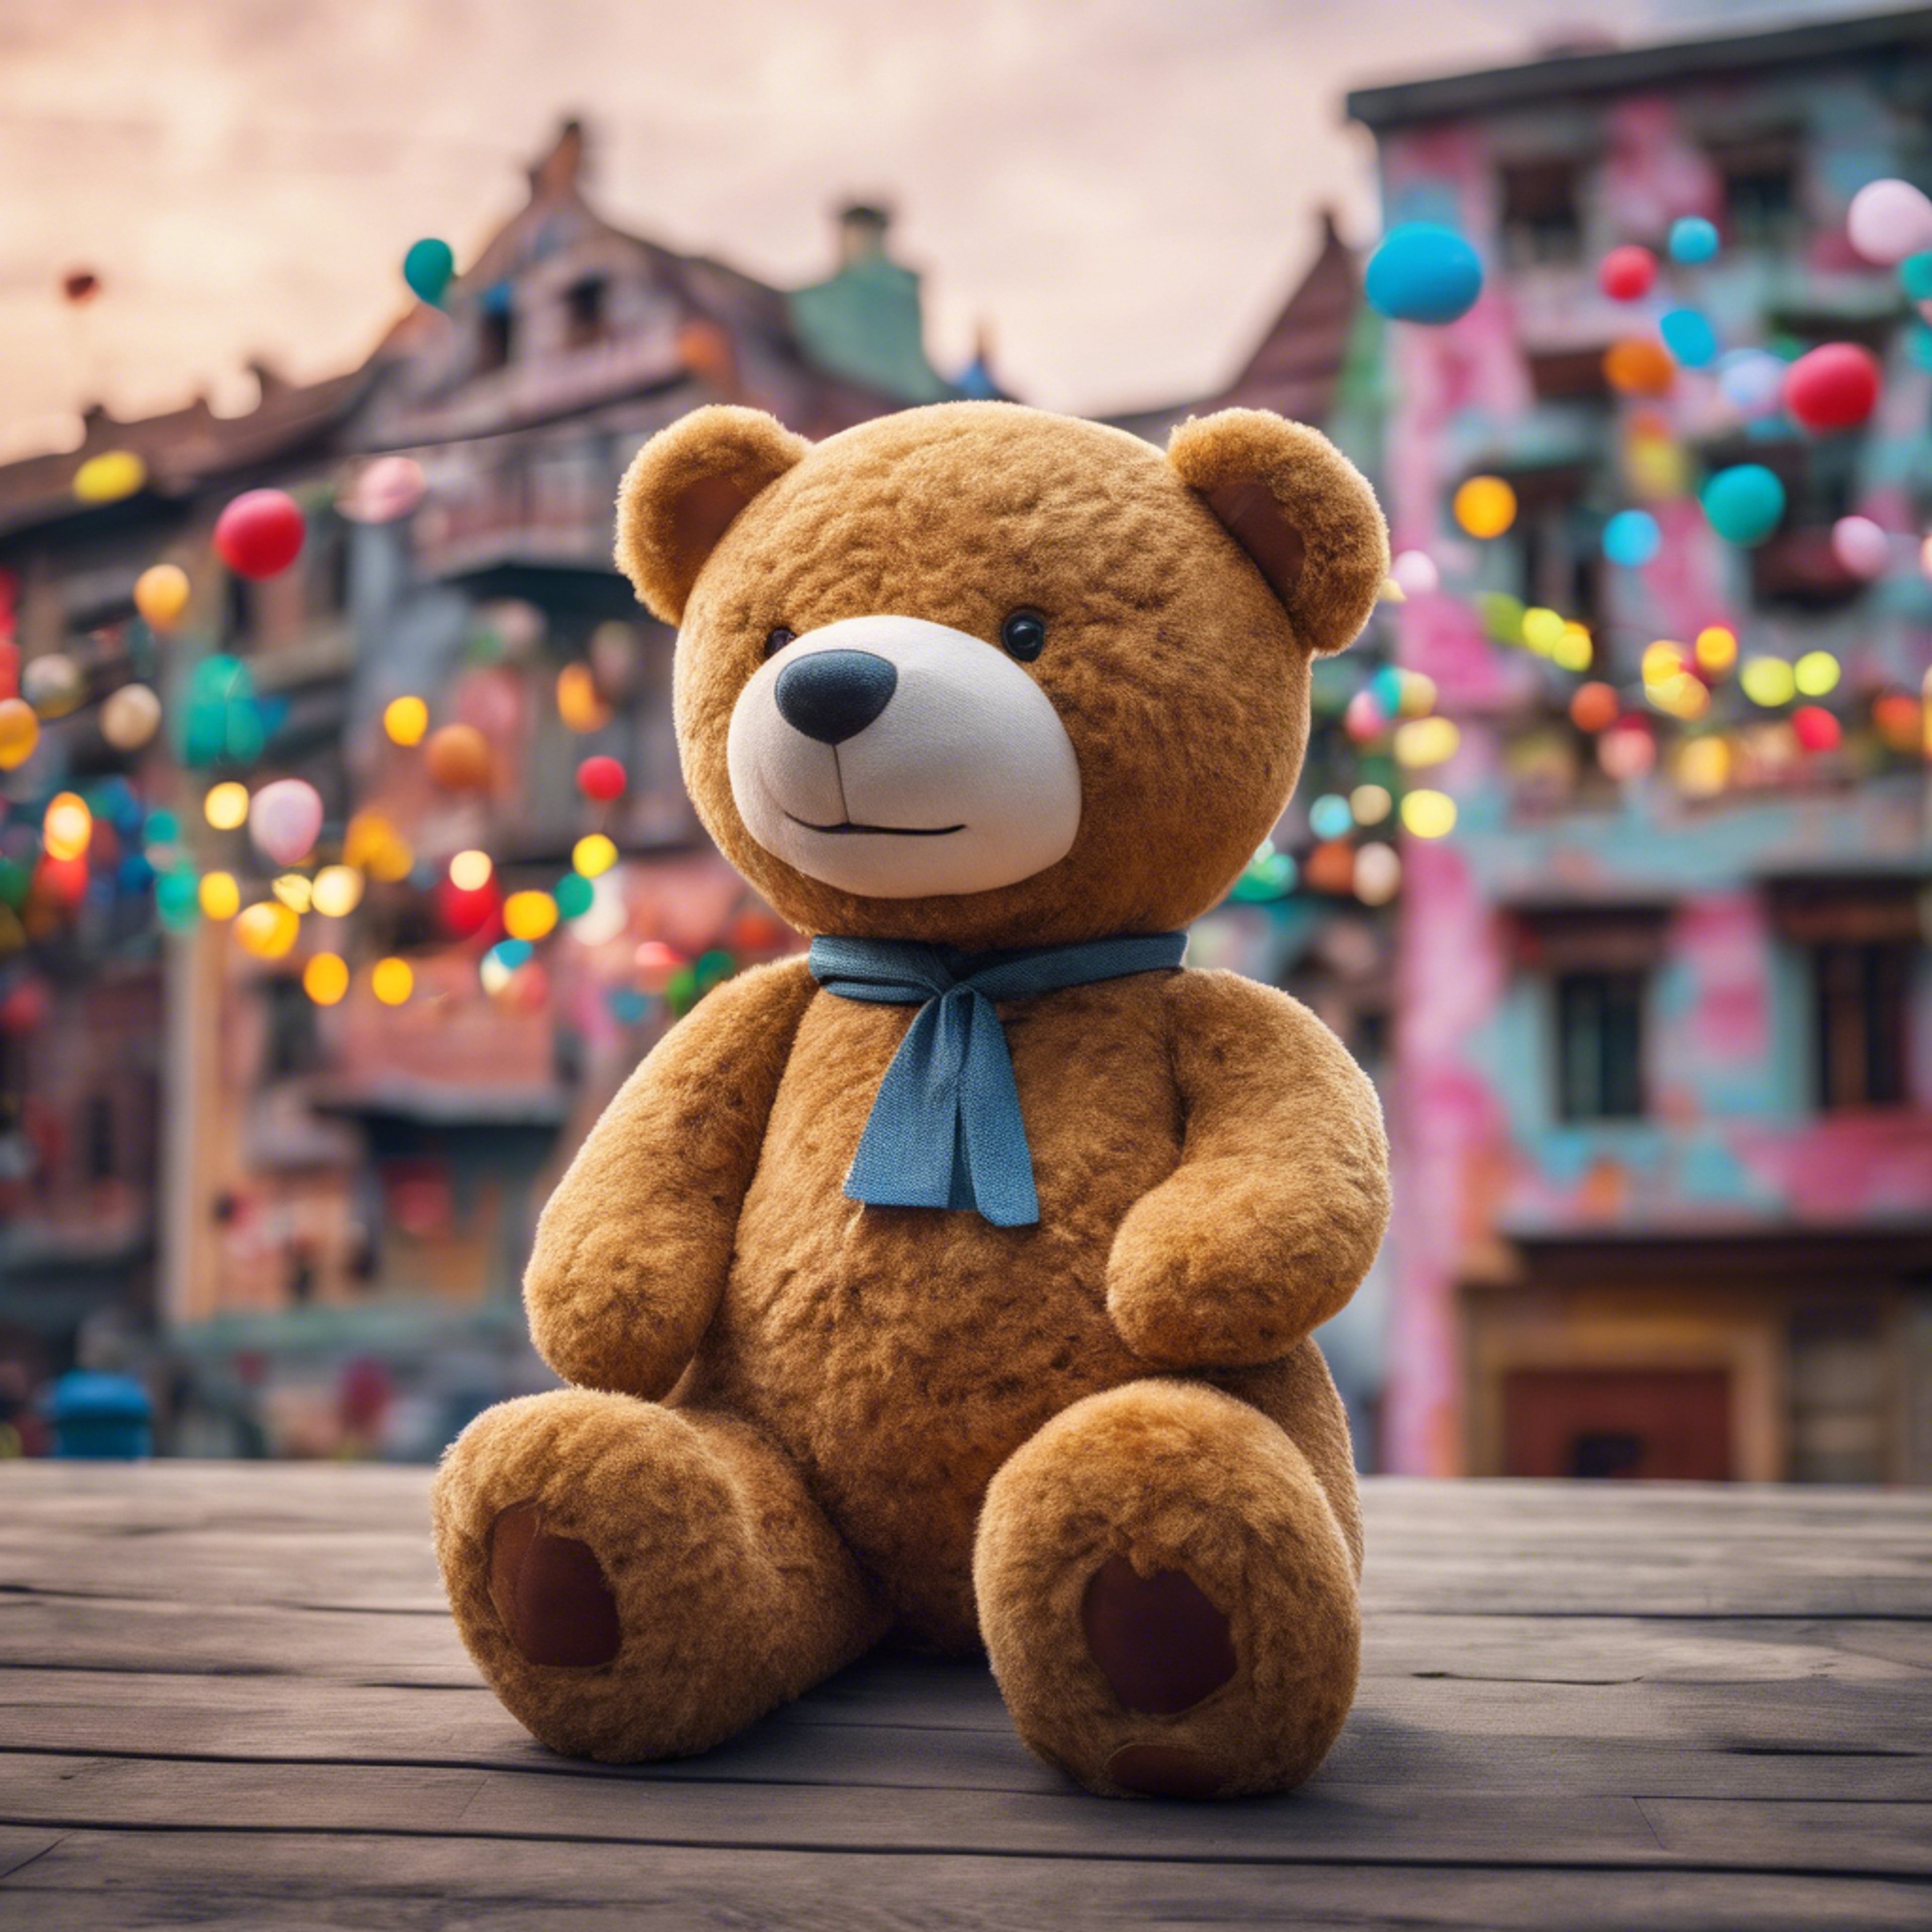 A giant teddy bear watching over a playful and colorful dream town. 벽지[2720b550e885450daa82]